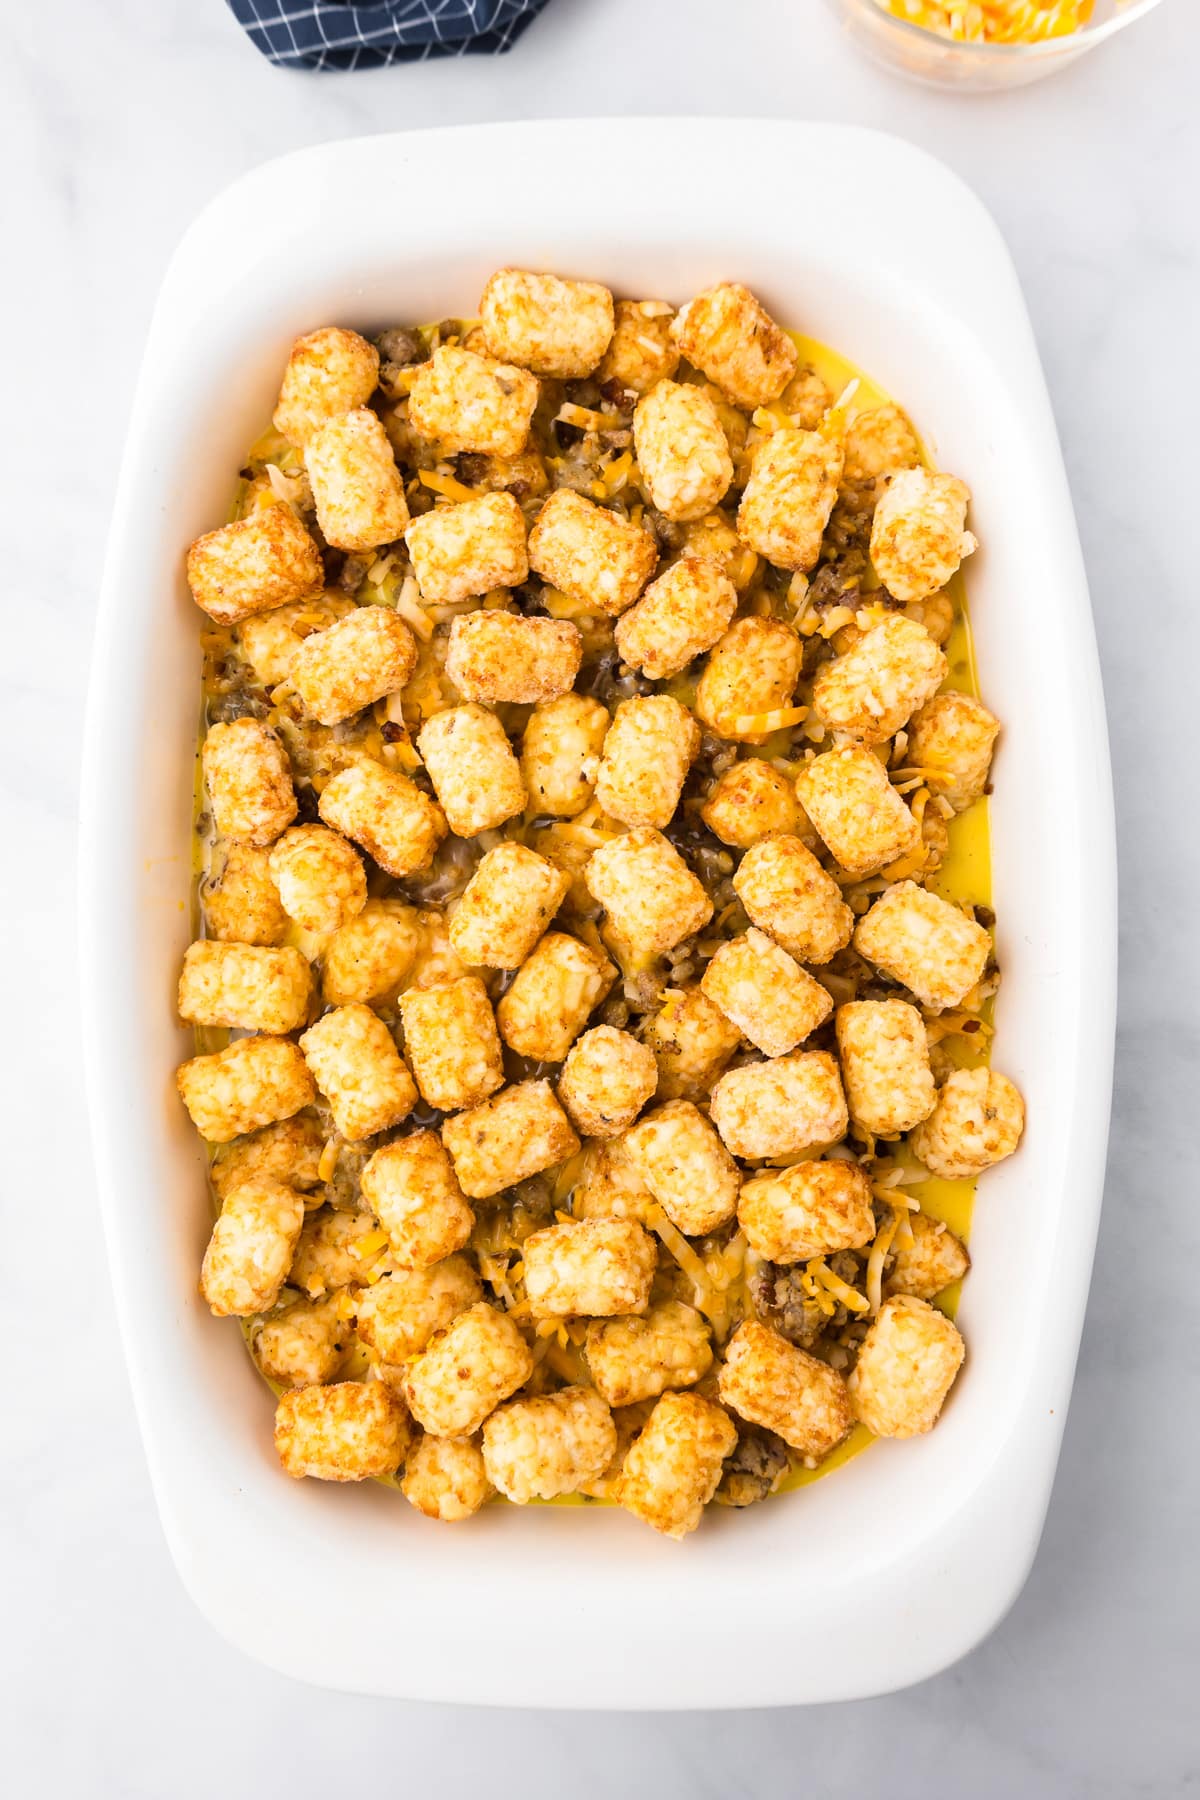 Tater tot casserole with frozen tater tots on top before baking.